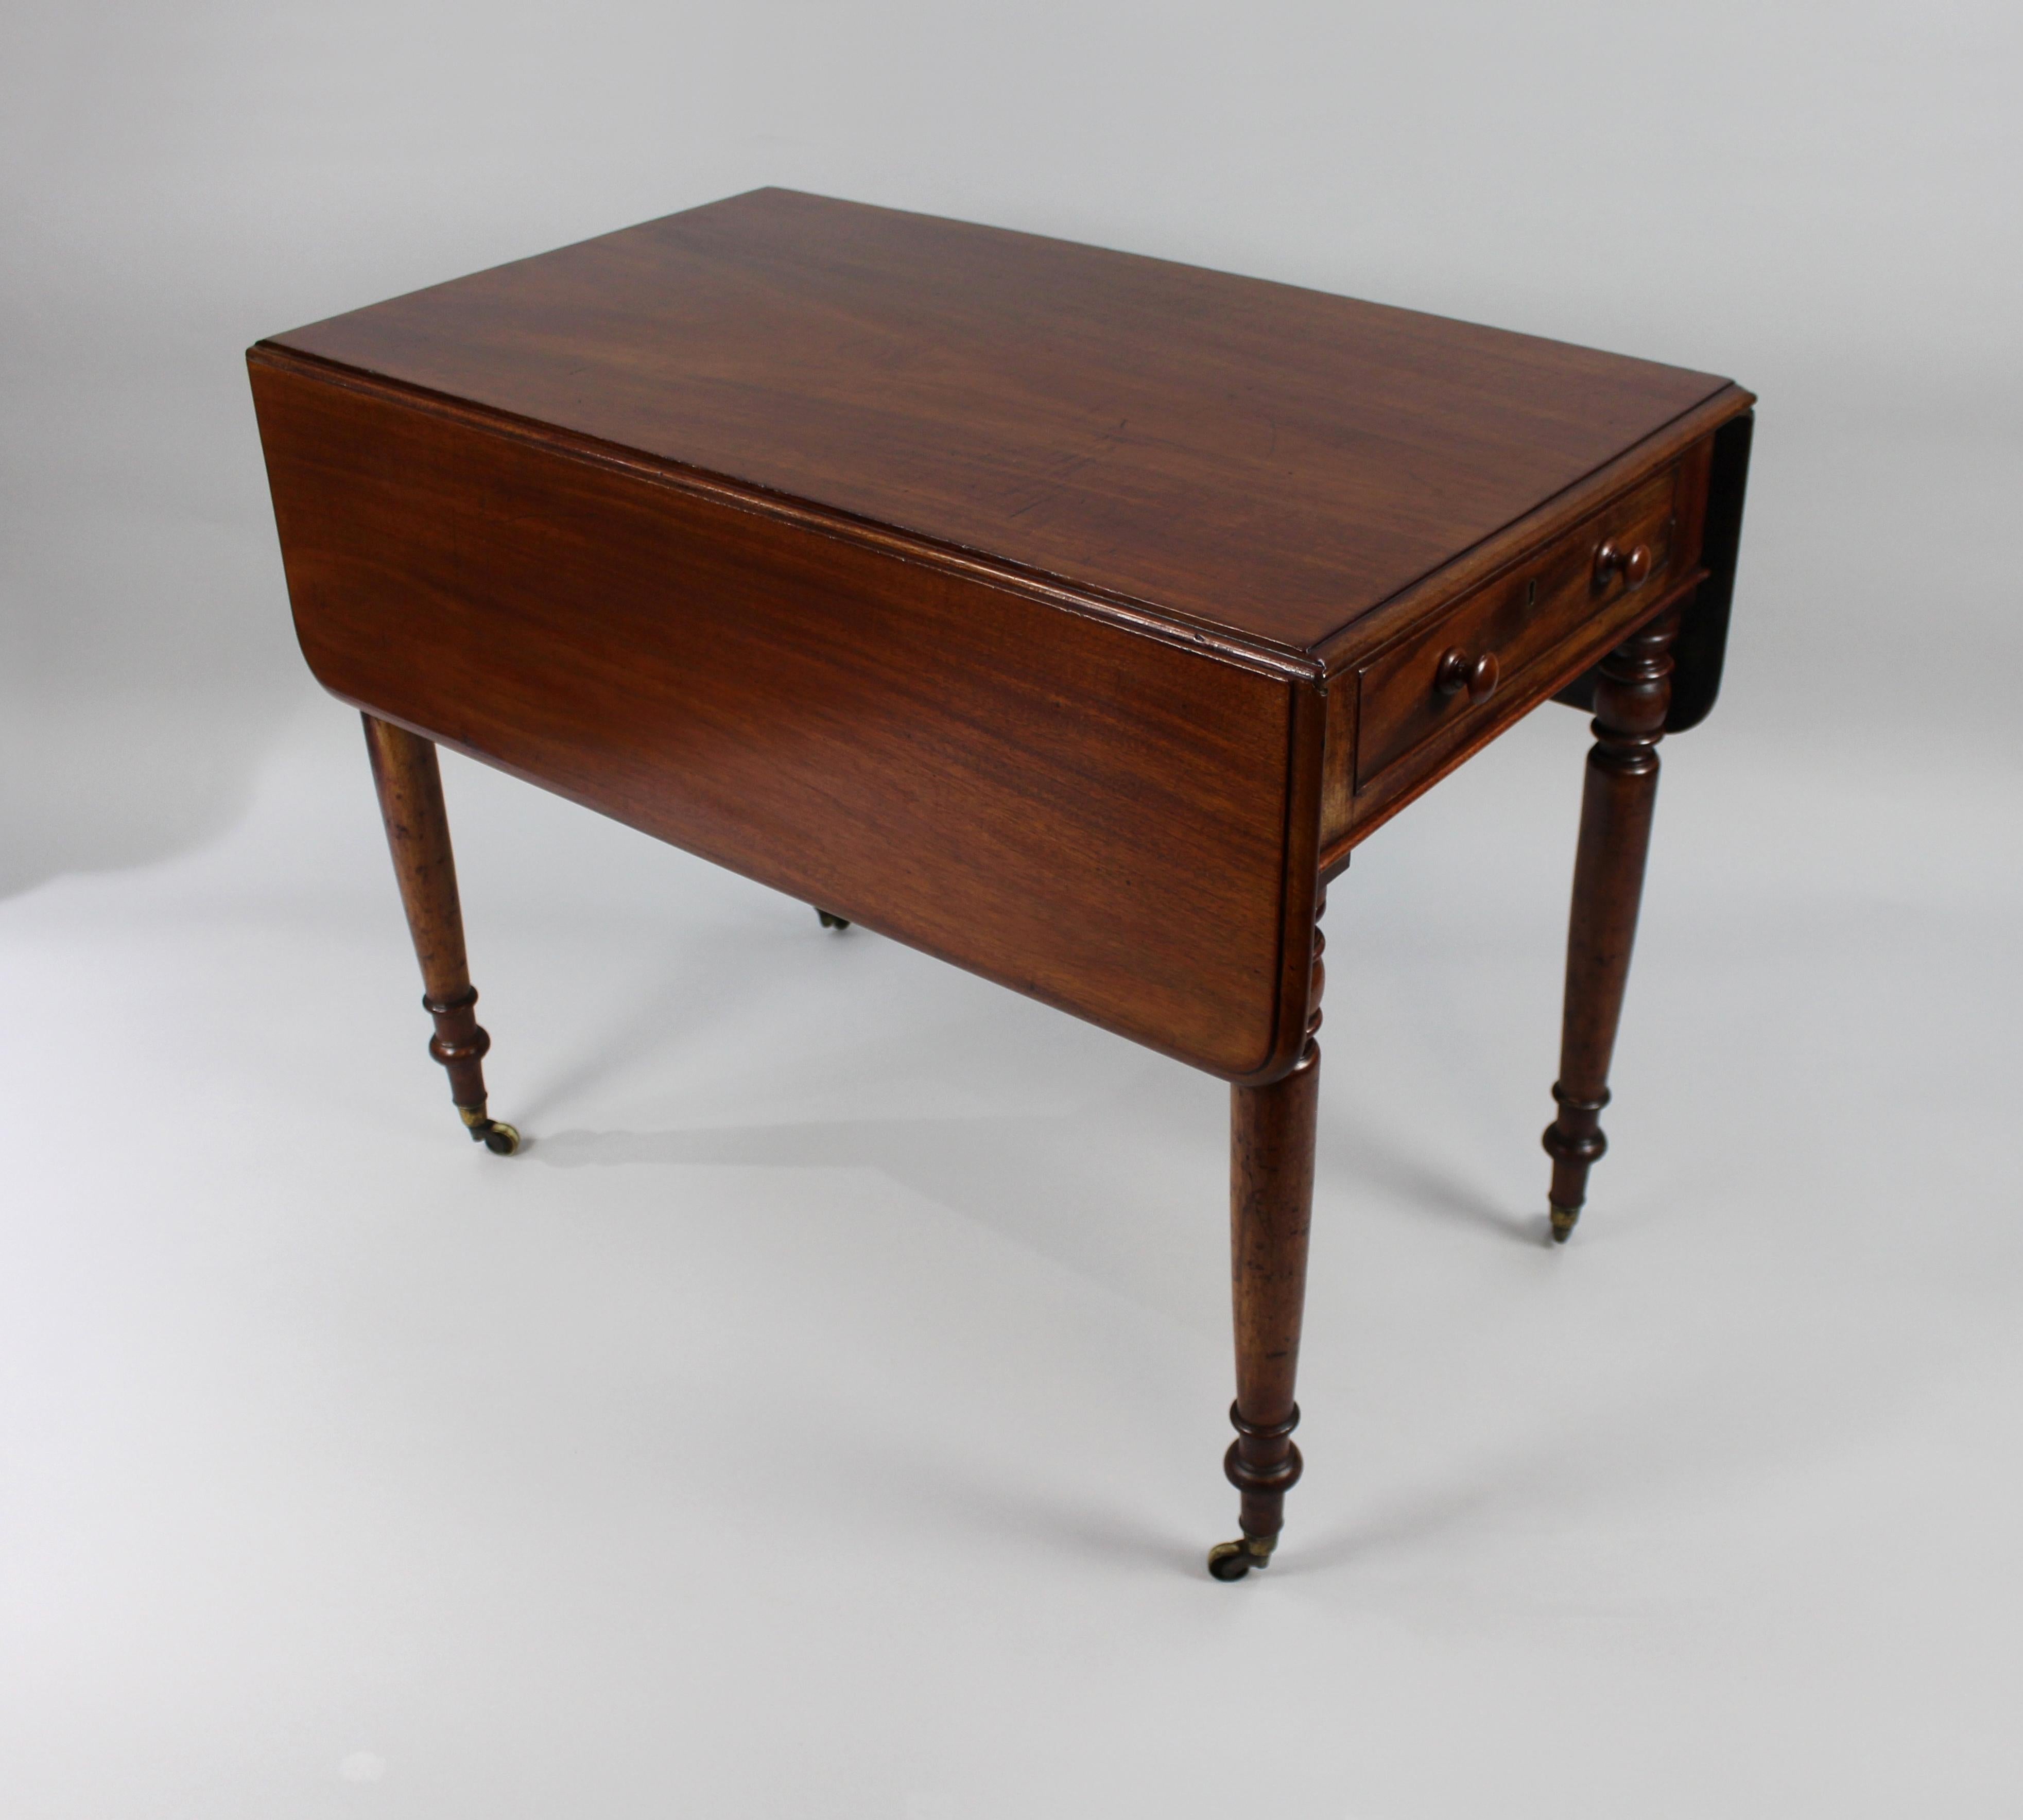 English Regency mahogany pembroke table


Measures: Length 91 cm 35 3/4 in 

Width (leaves down) 53.5 cm

21 in 
Width (leaves up) 103 cm 40 1/2 in 

Height 74 cm 29 in 
 

Period Regency

Wood Mahogany

Condition Very good